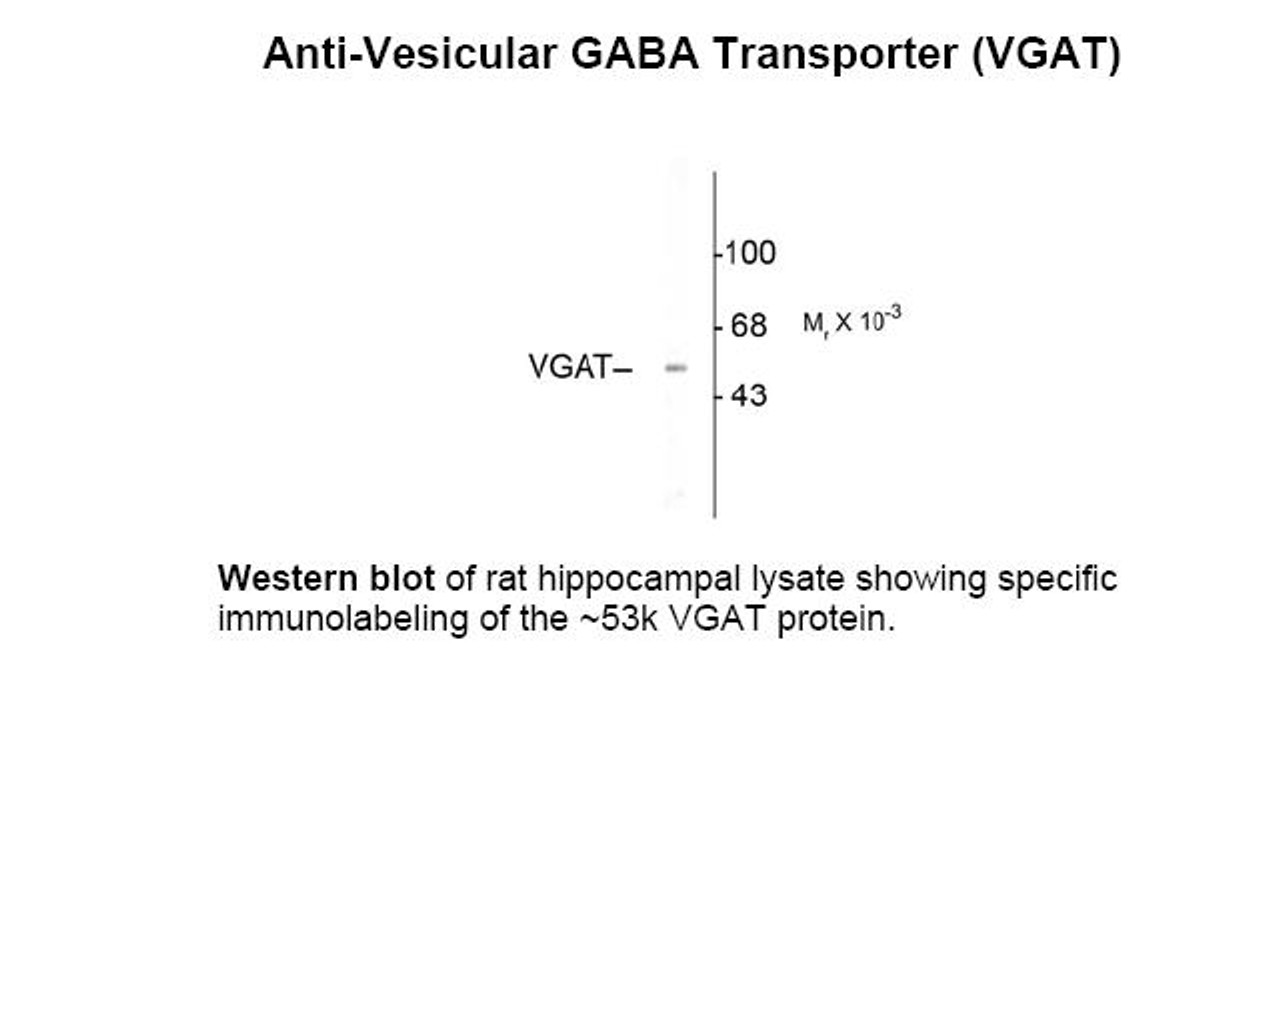 Western blot of rat hippocampal lysate showing specific immunolabeling of the ~53k VGAT protein.